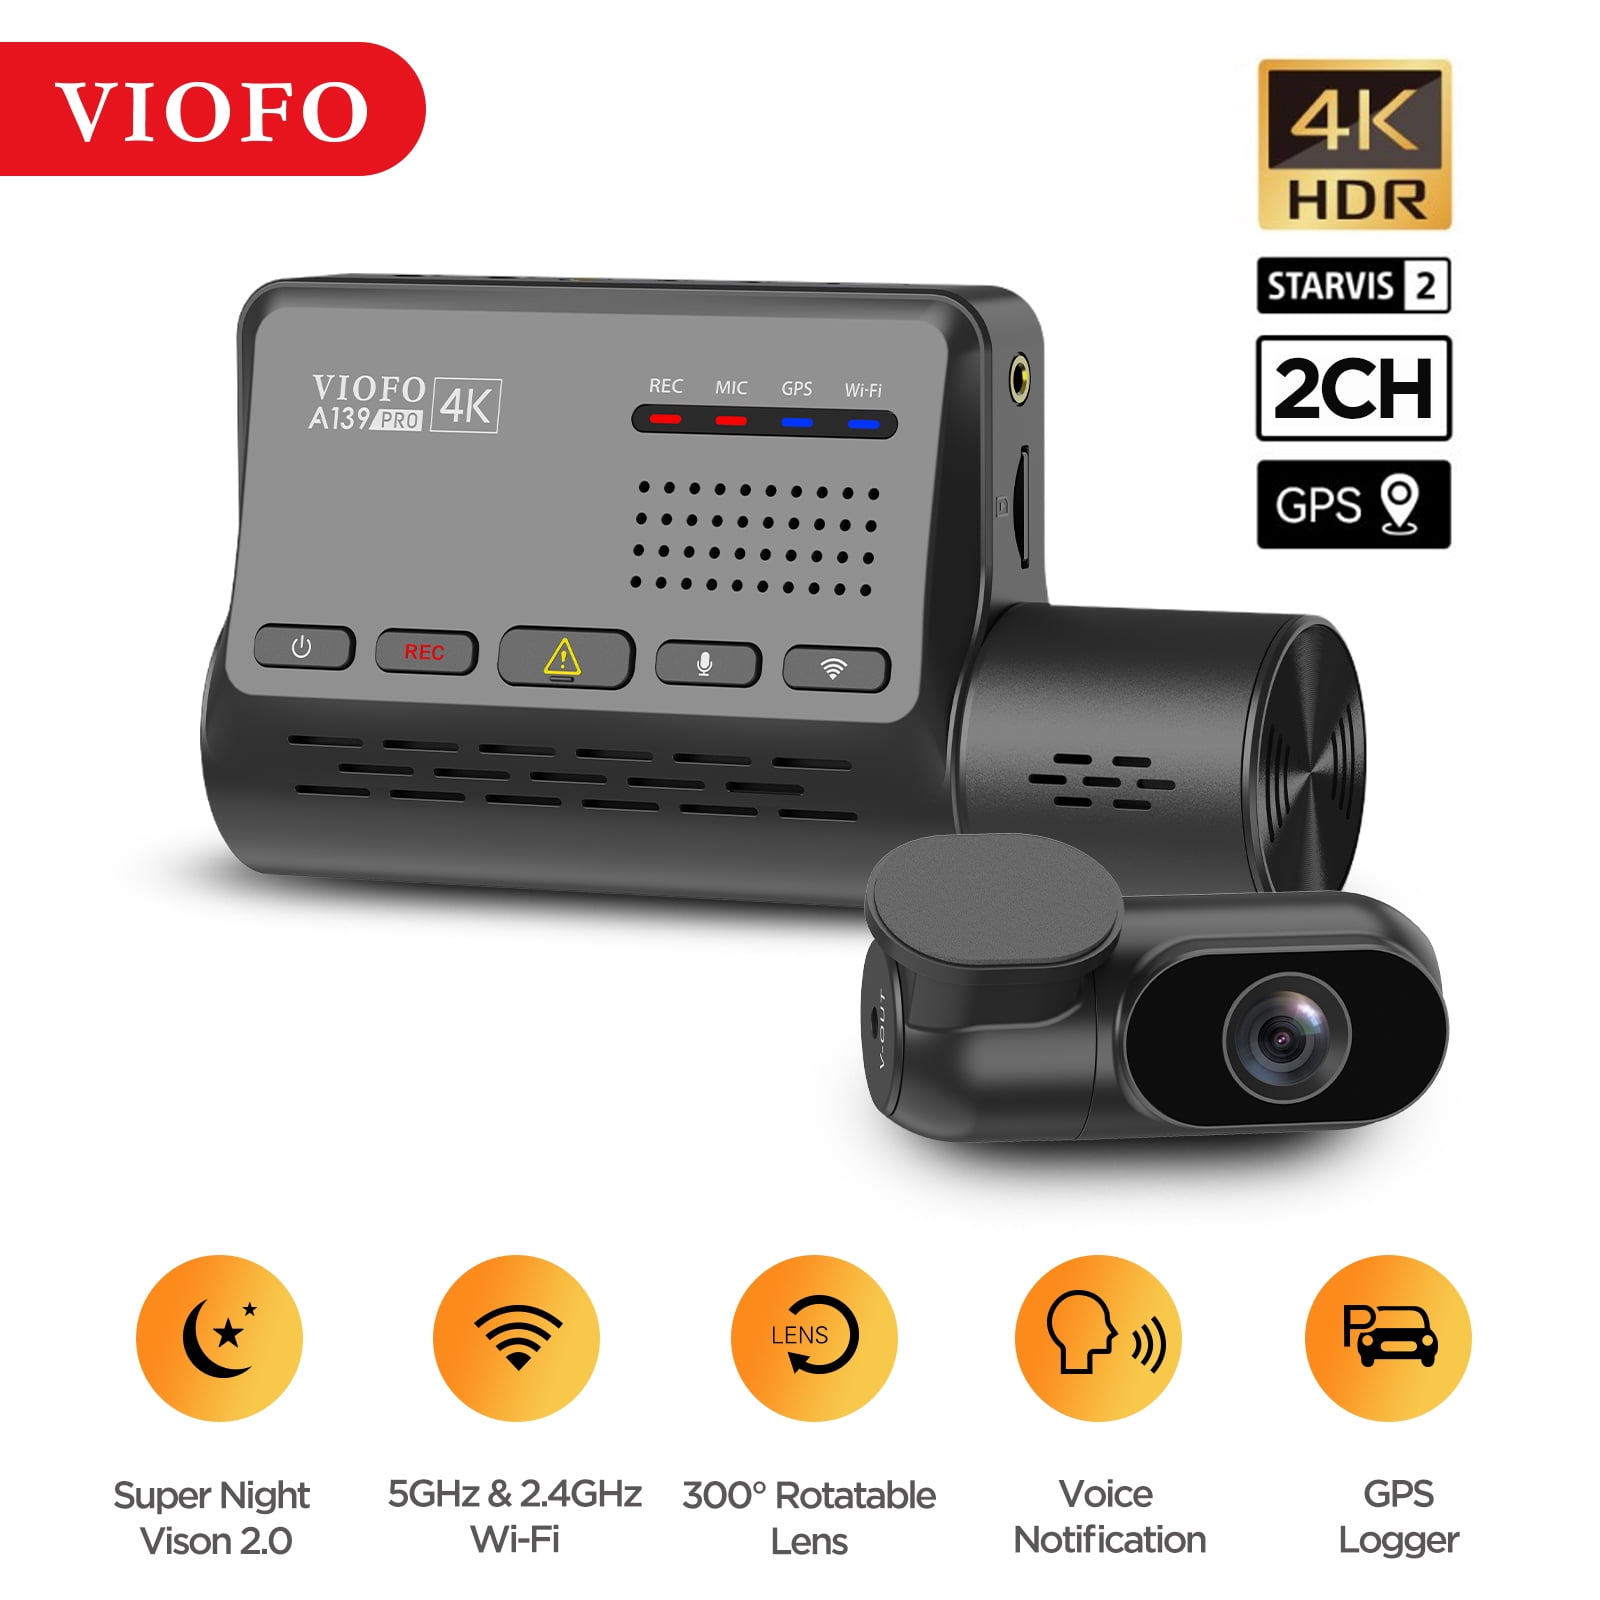 VIOFO 4K HDR Dash Cam Front and Rear A139 Pro 2CH, STARVIS 2 IMX678 Sensor,  Superb Night Vision, Ultra HD 4K + 1080P Dashcam for Car, 5GHz WiFi GPS